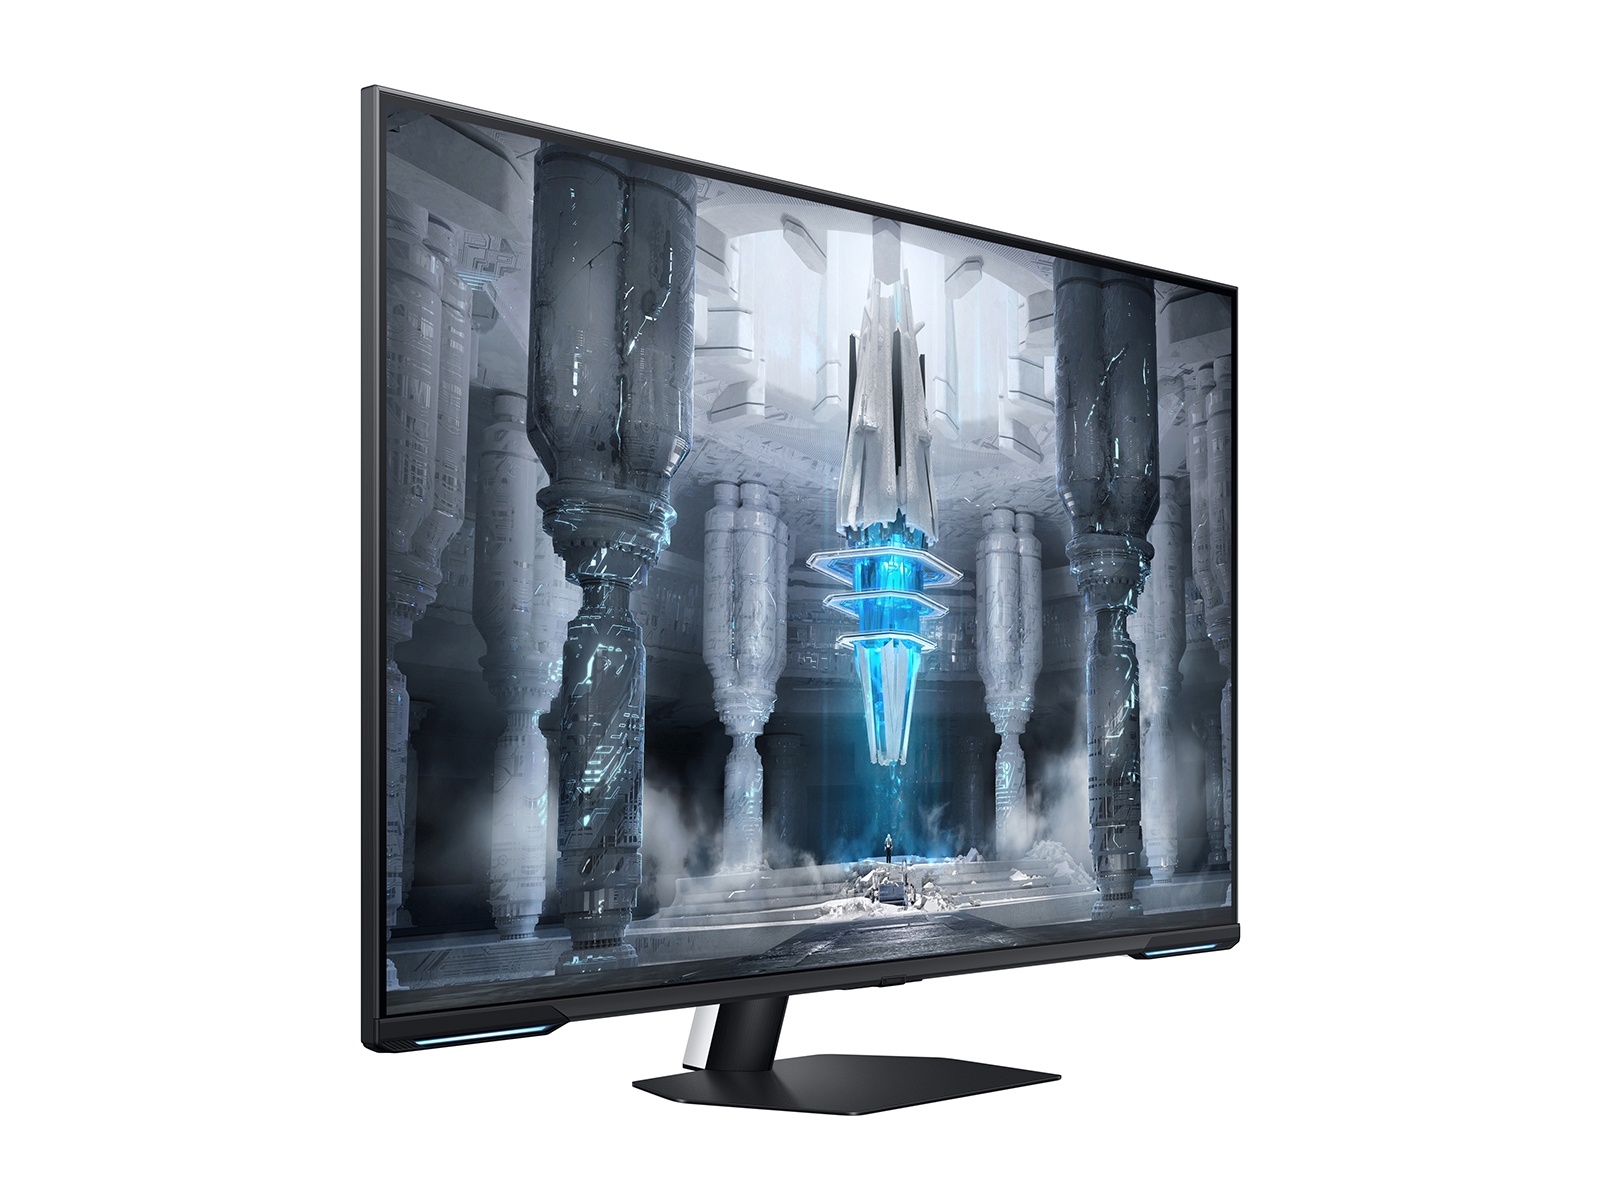 Samsung Odyssey G7 1440p 240hz Gaming Monitor for Sale in